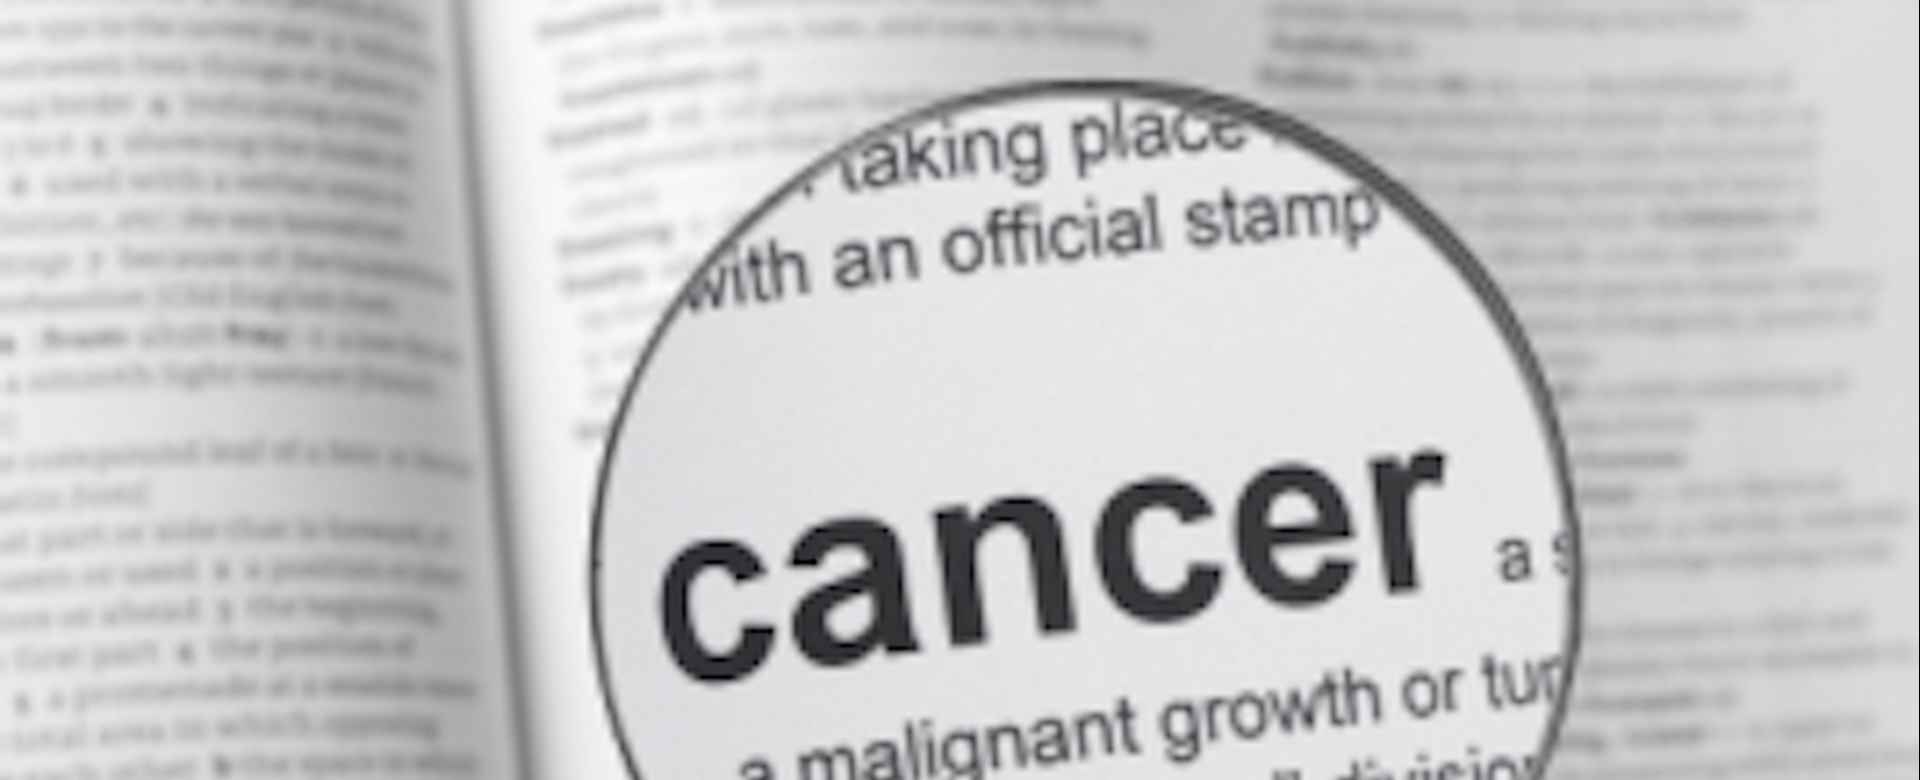 Health Payors, Health Care professionals working together on Cancer